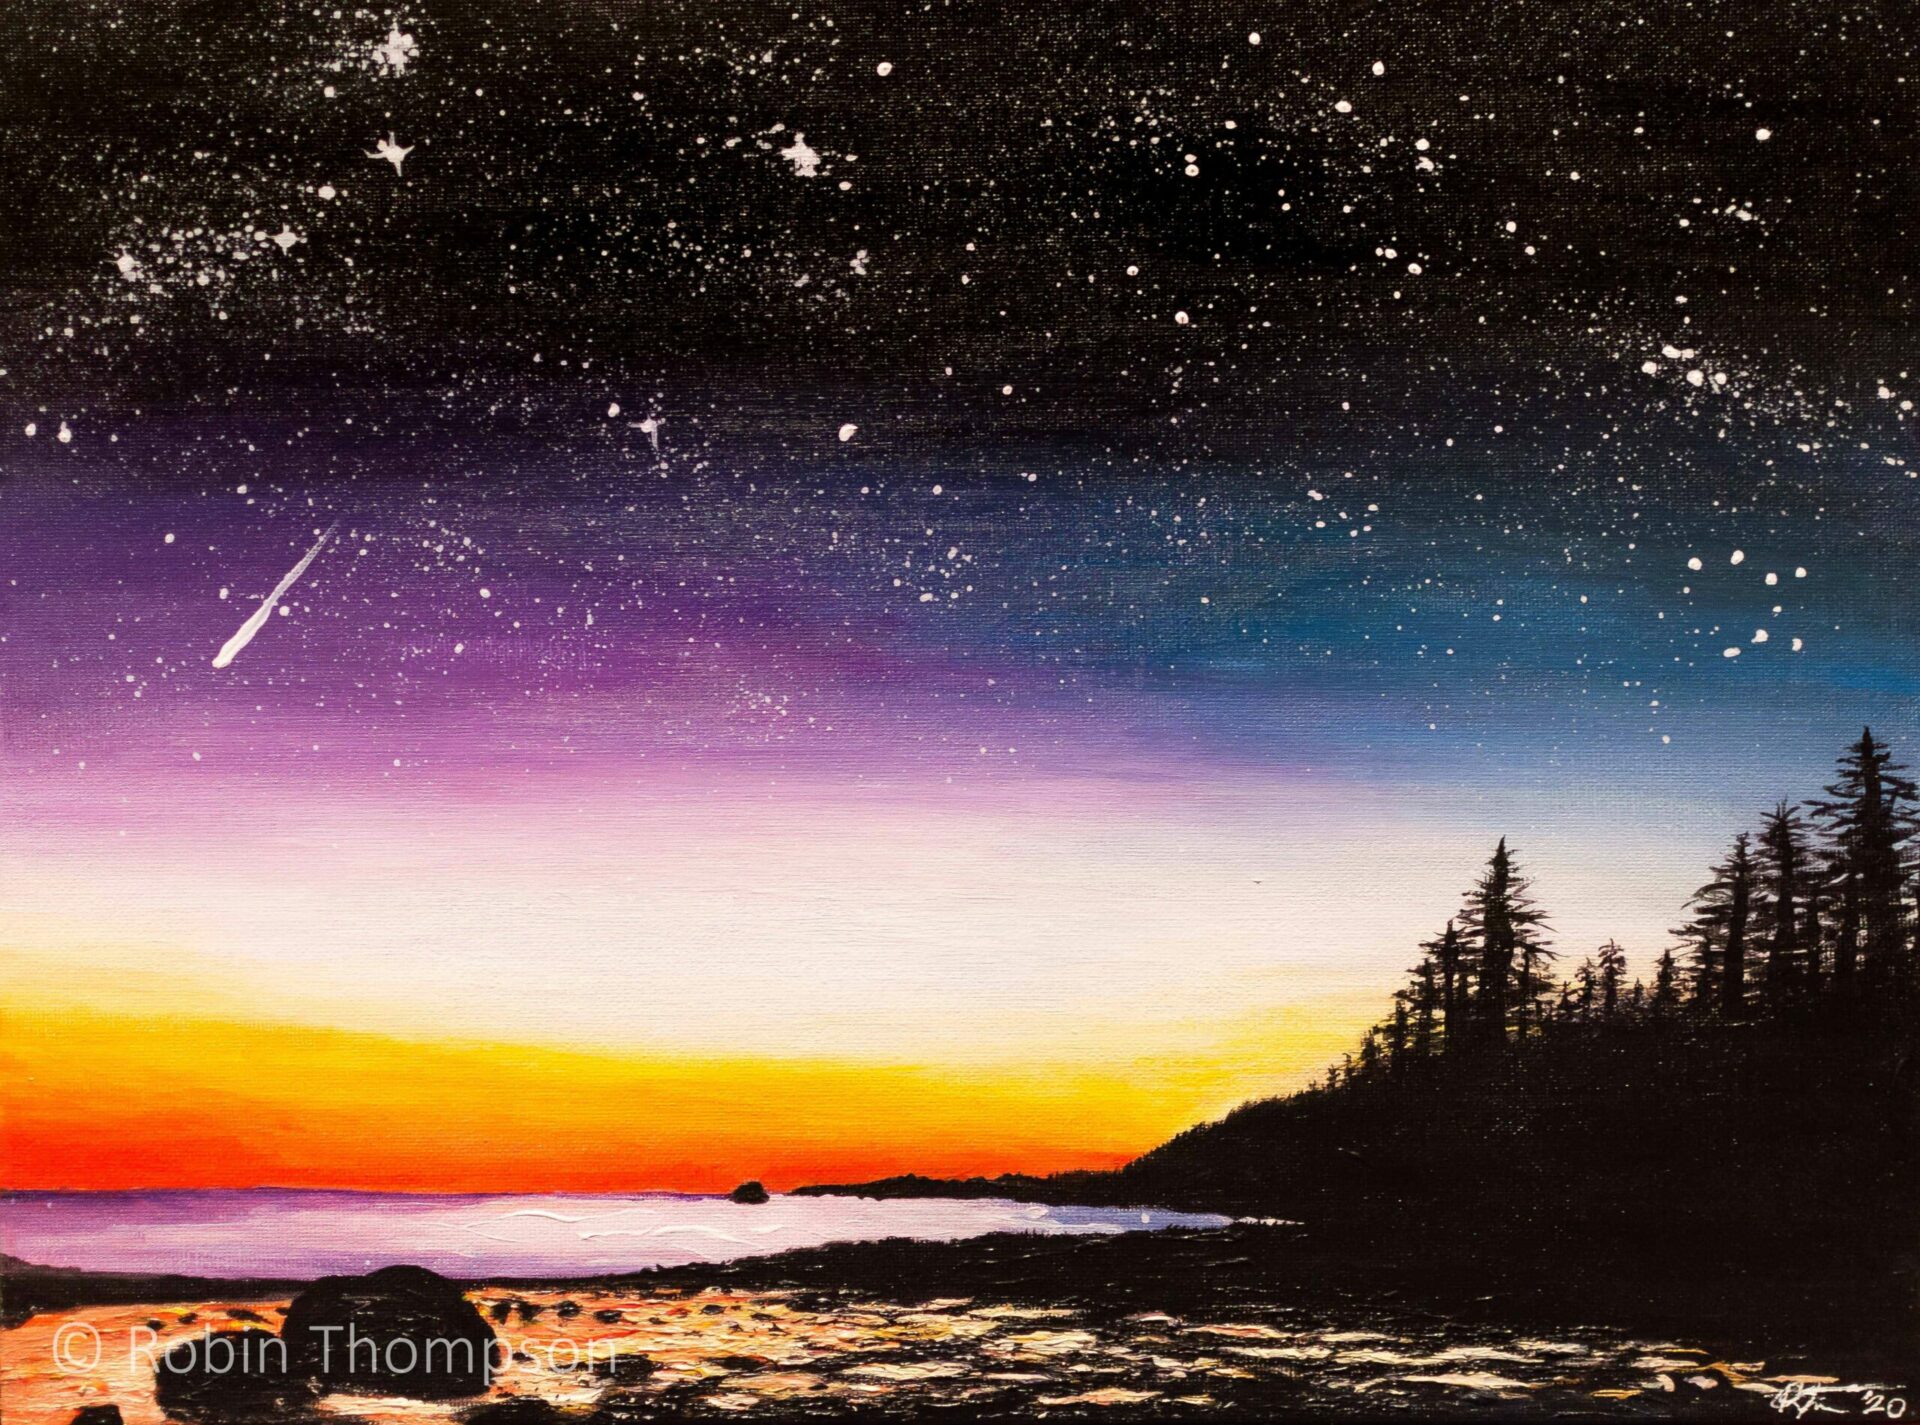 An acrylic painting of a sunset over a lake/ocean scene, with forests silhoutted on the right hand side, and black skies with stars up the top. In the midground there are whites, purples, blues, oranges and reds, and a comet is seen on the left hand side.